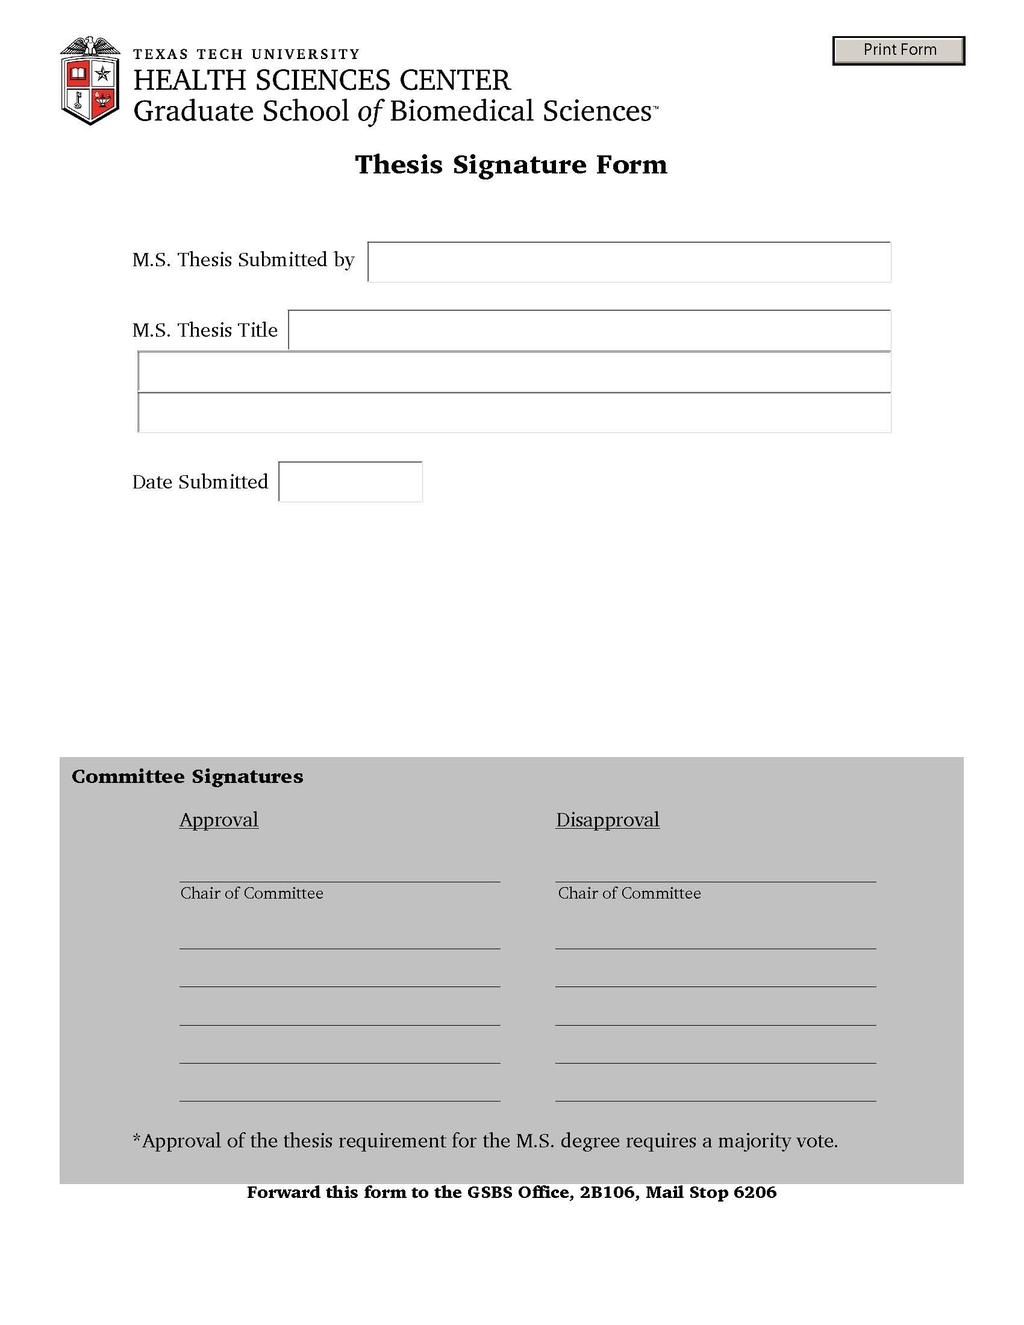 THESIS SIGNATURE FORM (MUST BE COMPLETED ON-LINE AT: http://www.ttuhsc.